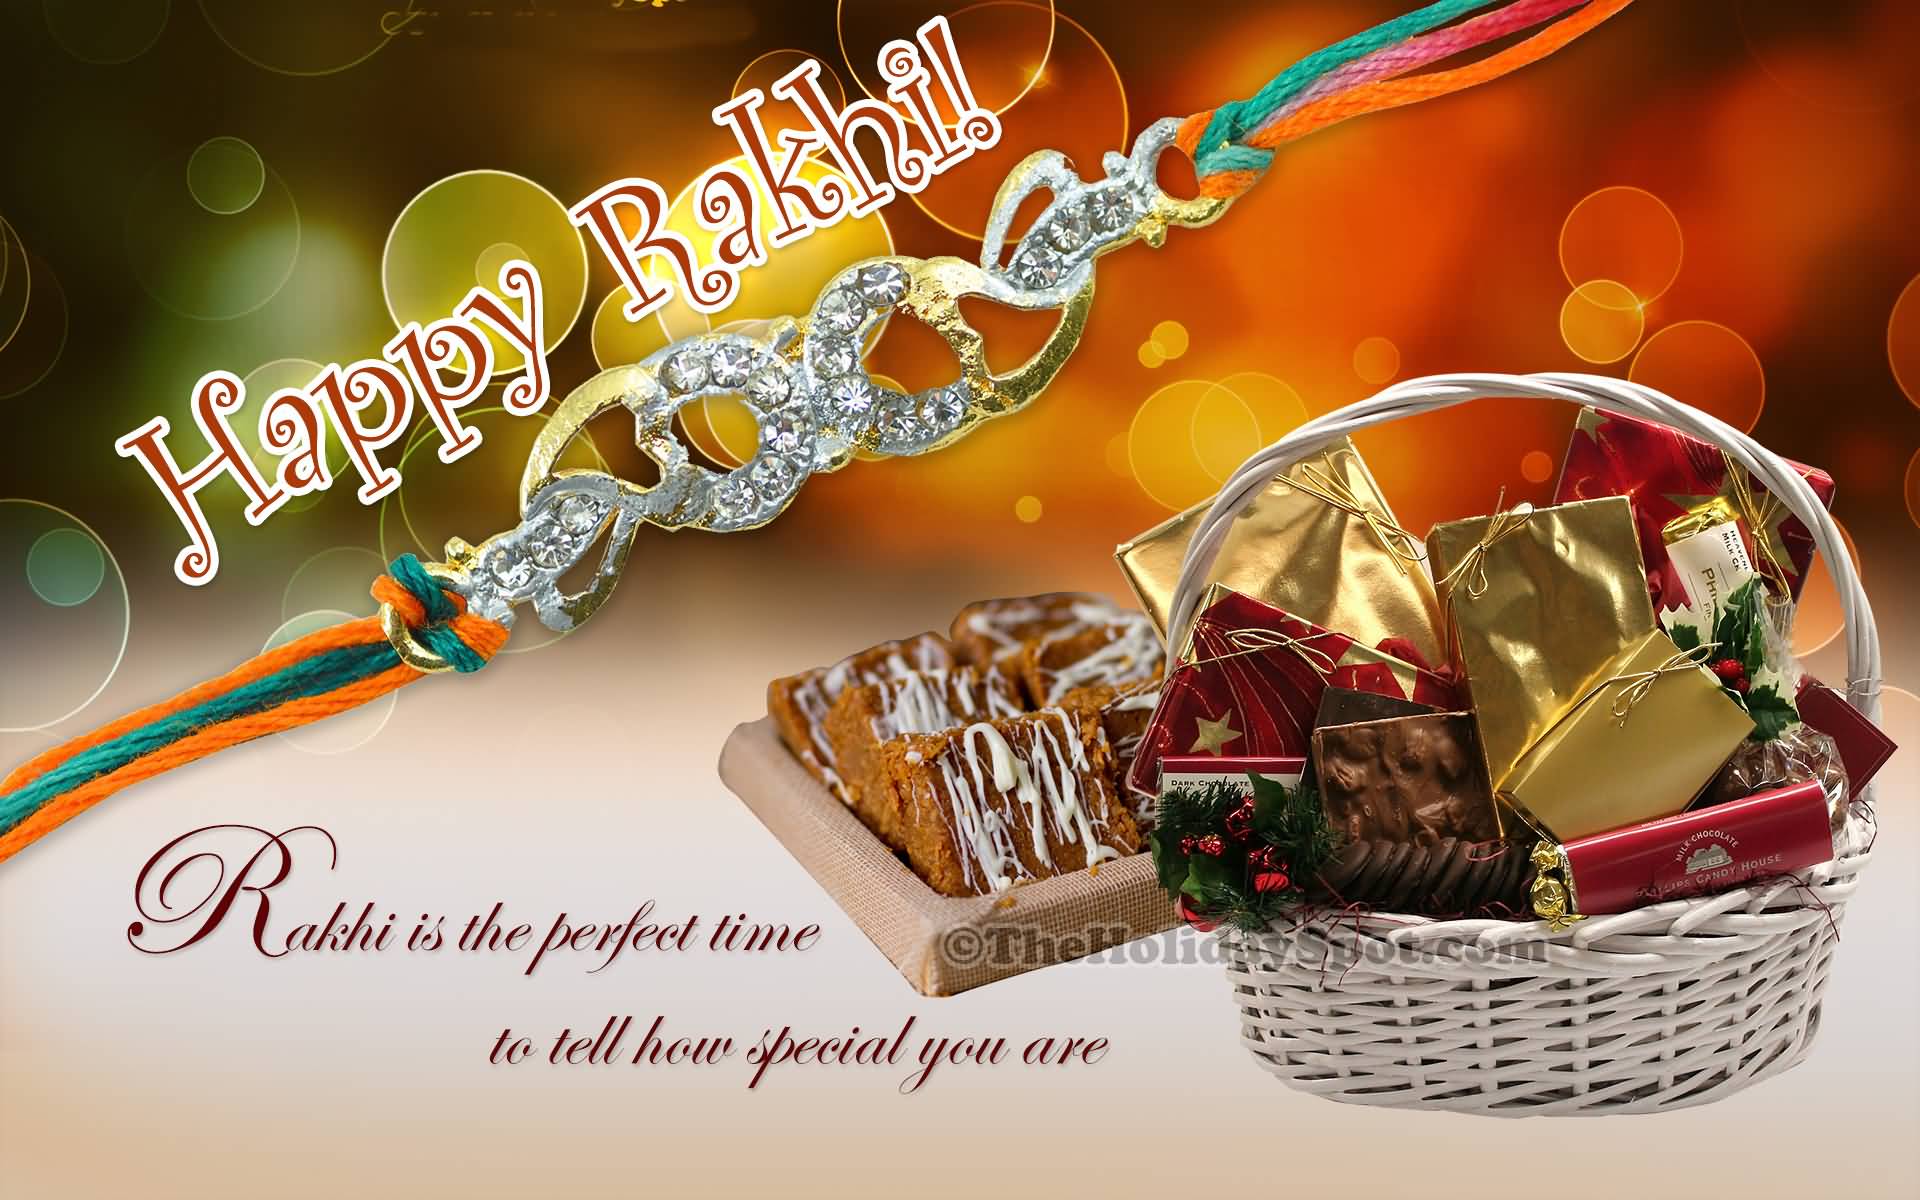 Happy Rakhi Rakhi Is The Perfect Time To Tell How Special You Are Gifts In Basket